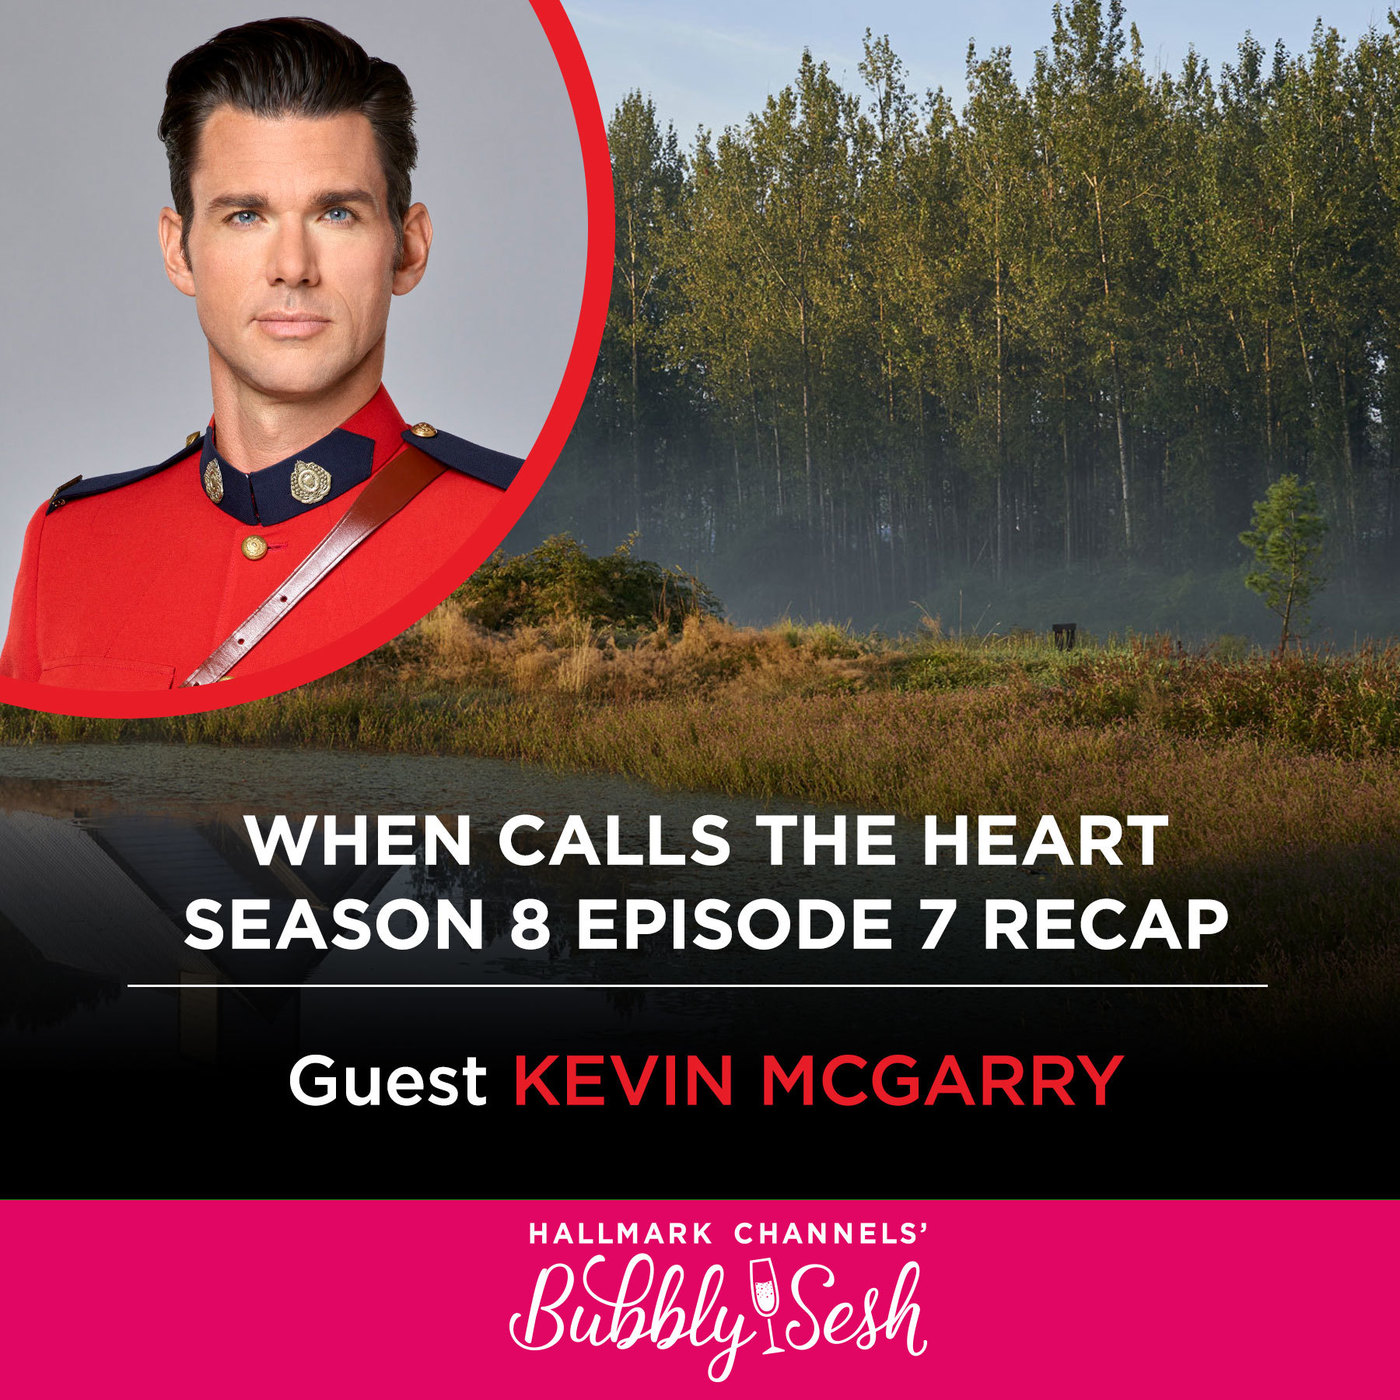 When Calls the Heart S8 Ep 7 Recap with Guest Kevin McGarry